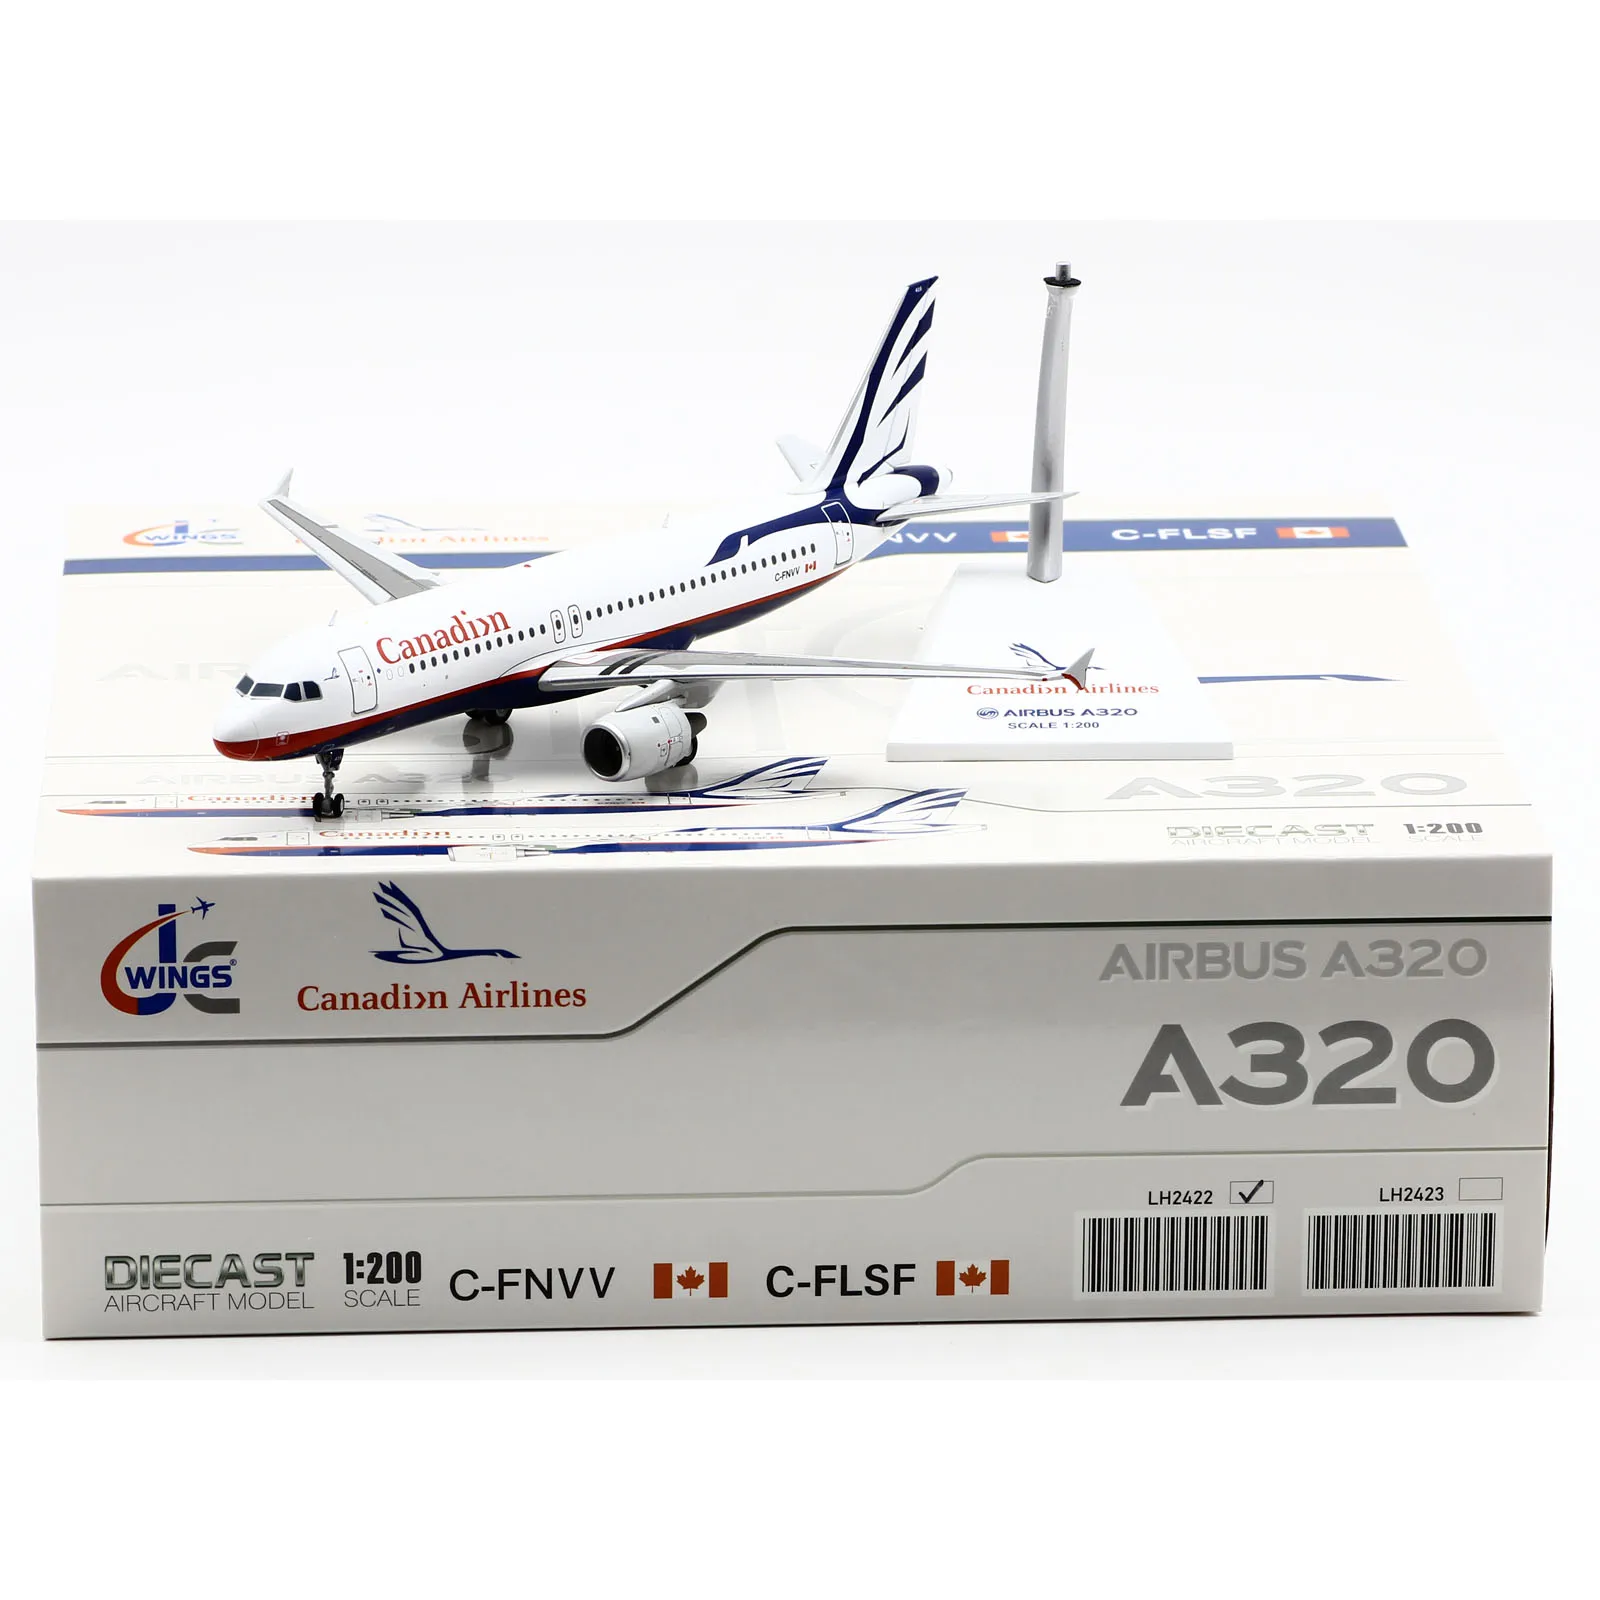 

LH2422 Alloy Collectible Plane Gift JC Wings 1:200 Canadian Airlines Airbus A320 Diecast Aircraft Jet Model C-FNVV With Stand